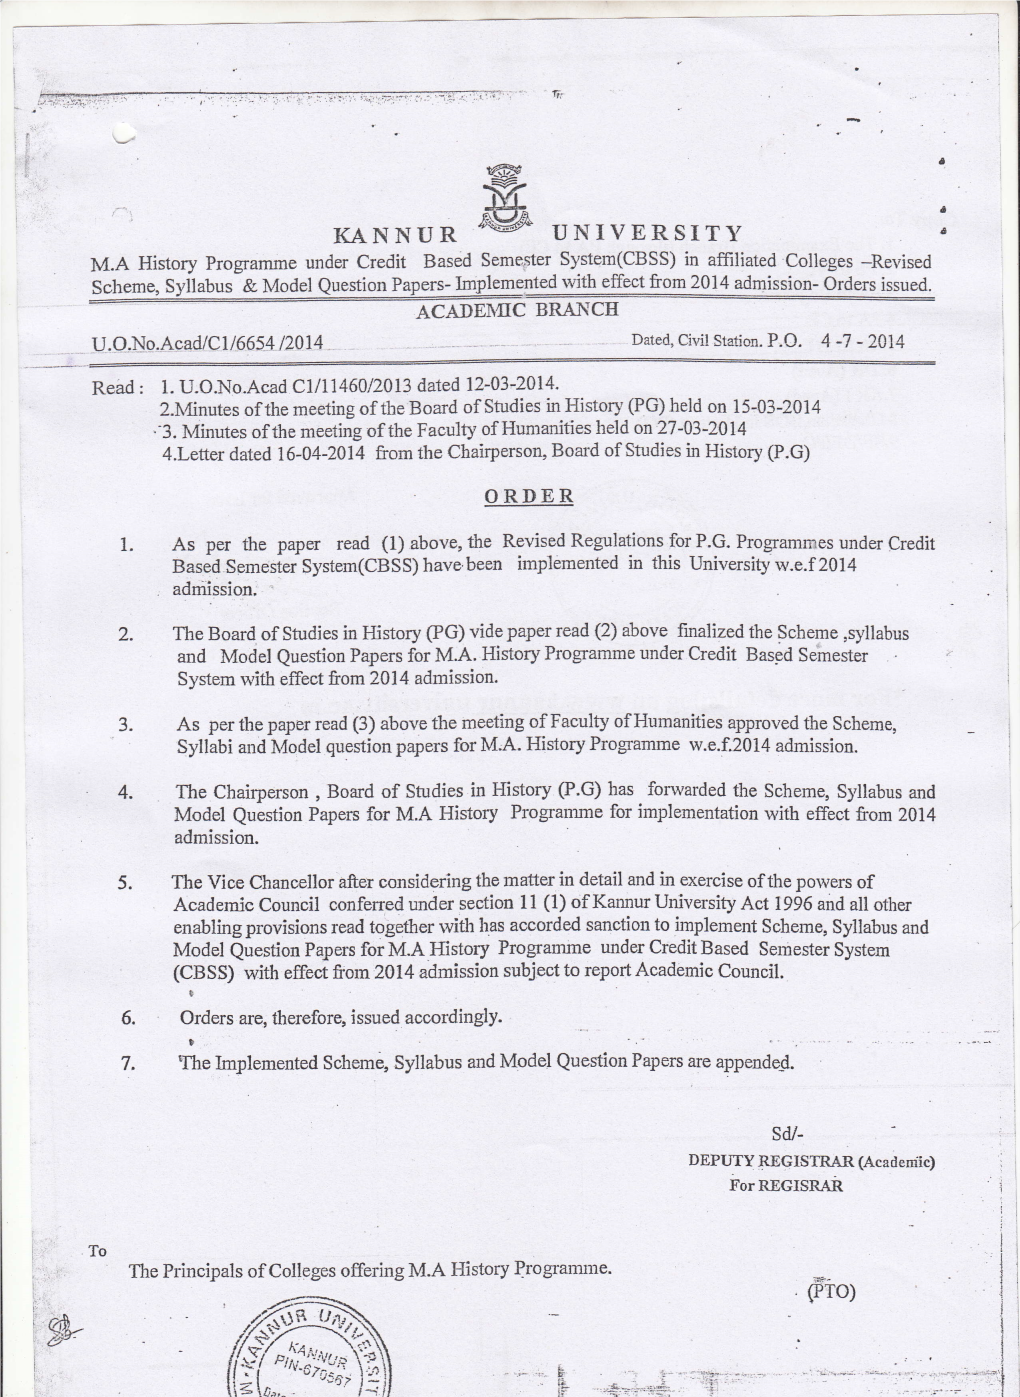 Univergity M.A History Programme Under Credit Based Seme.,Ster System(CBSS) in Affiliated Colleges -Revised